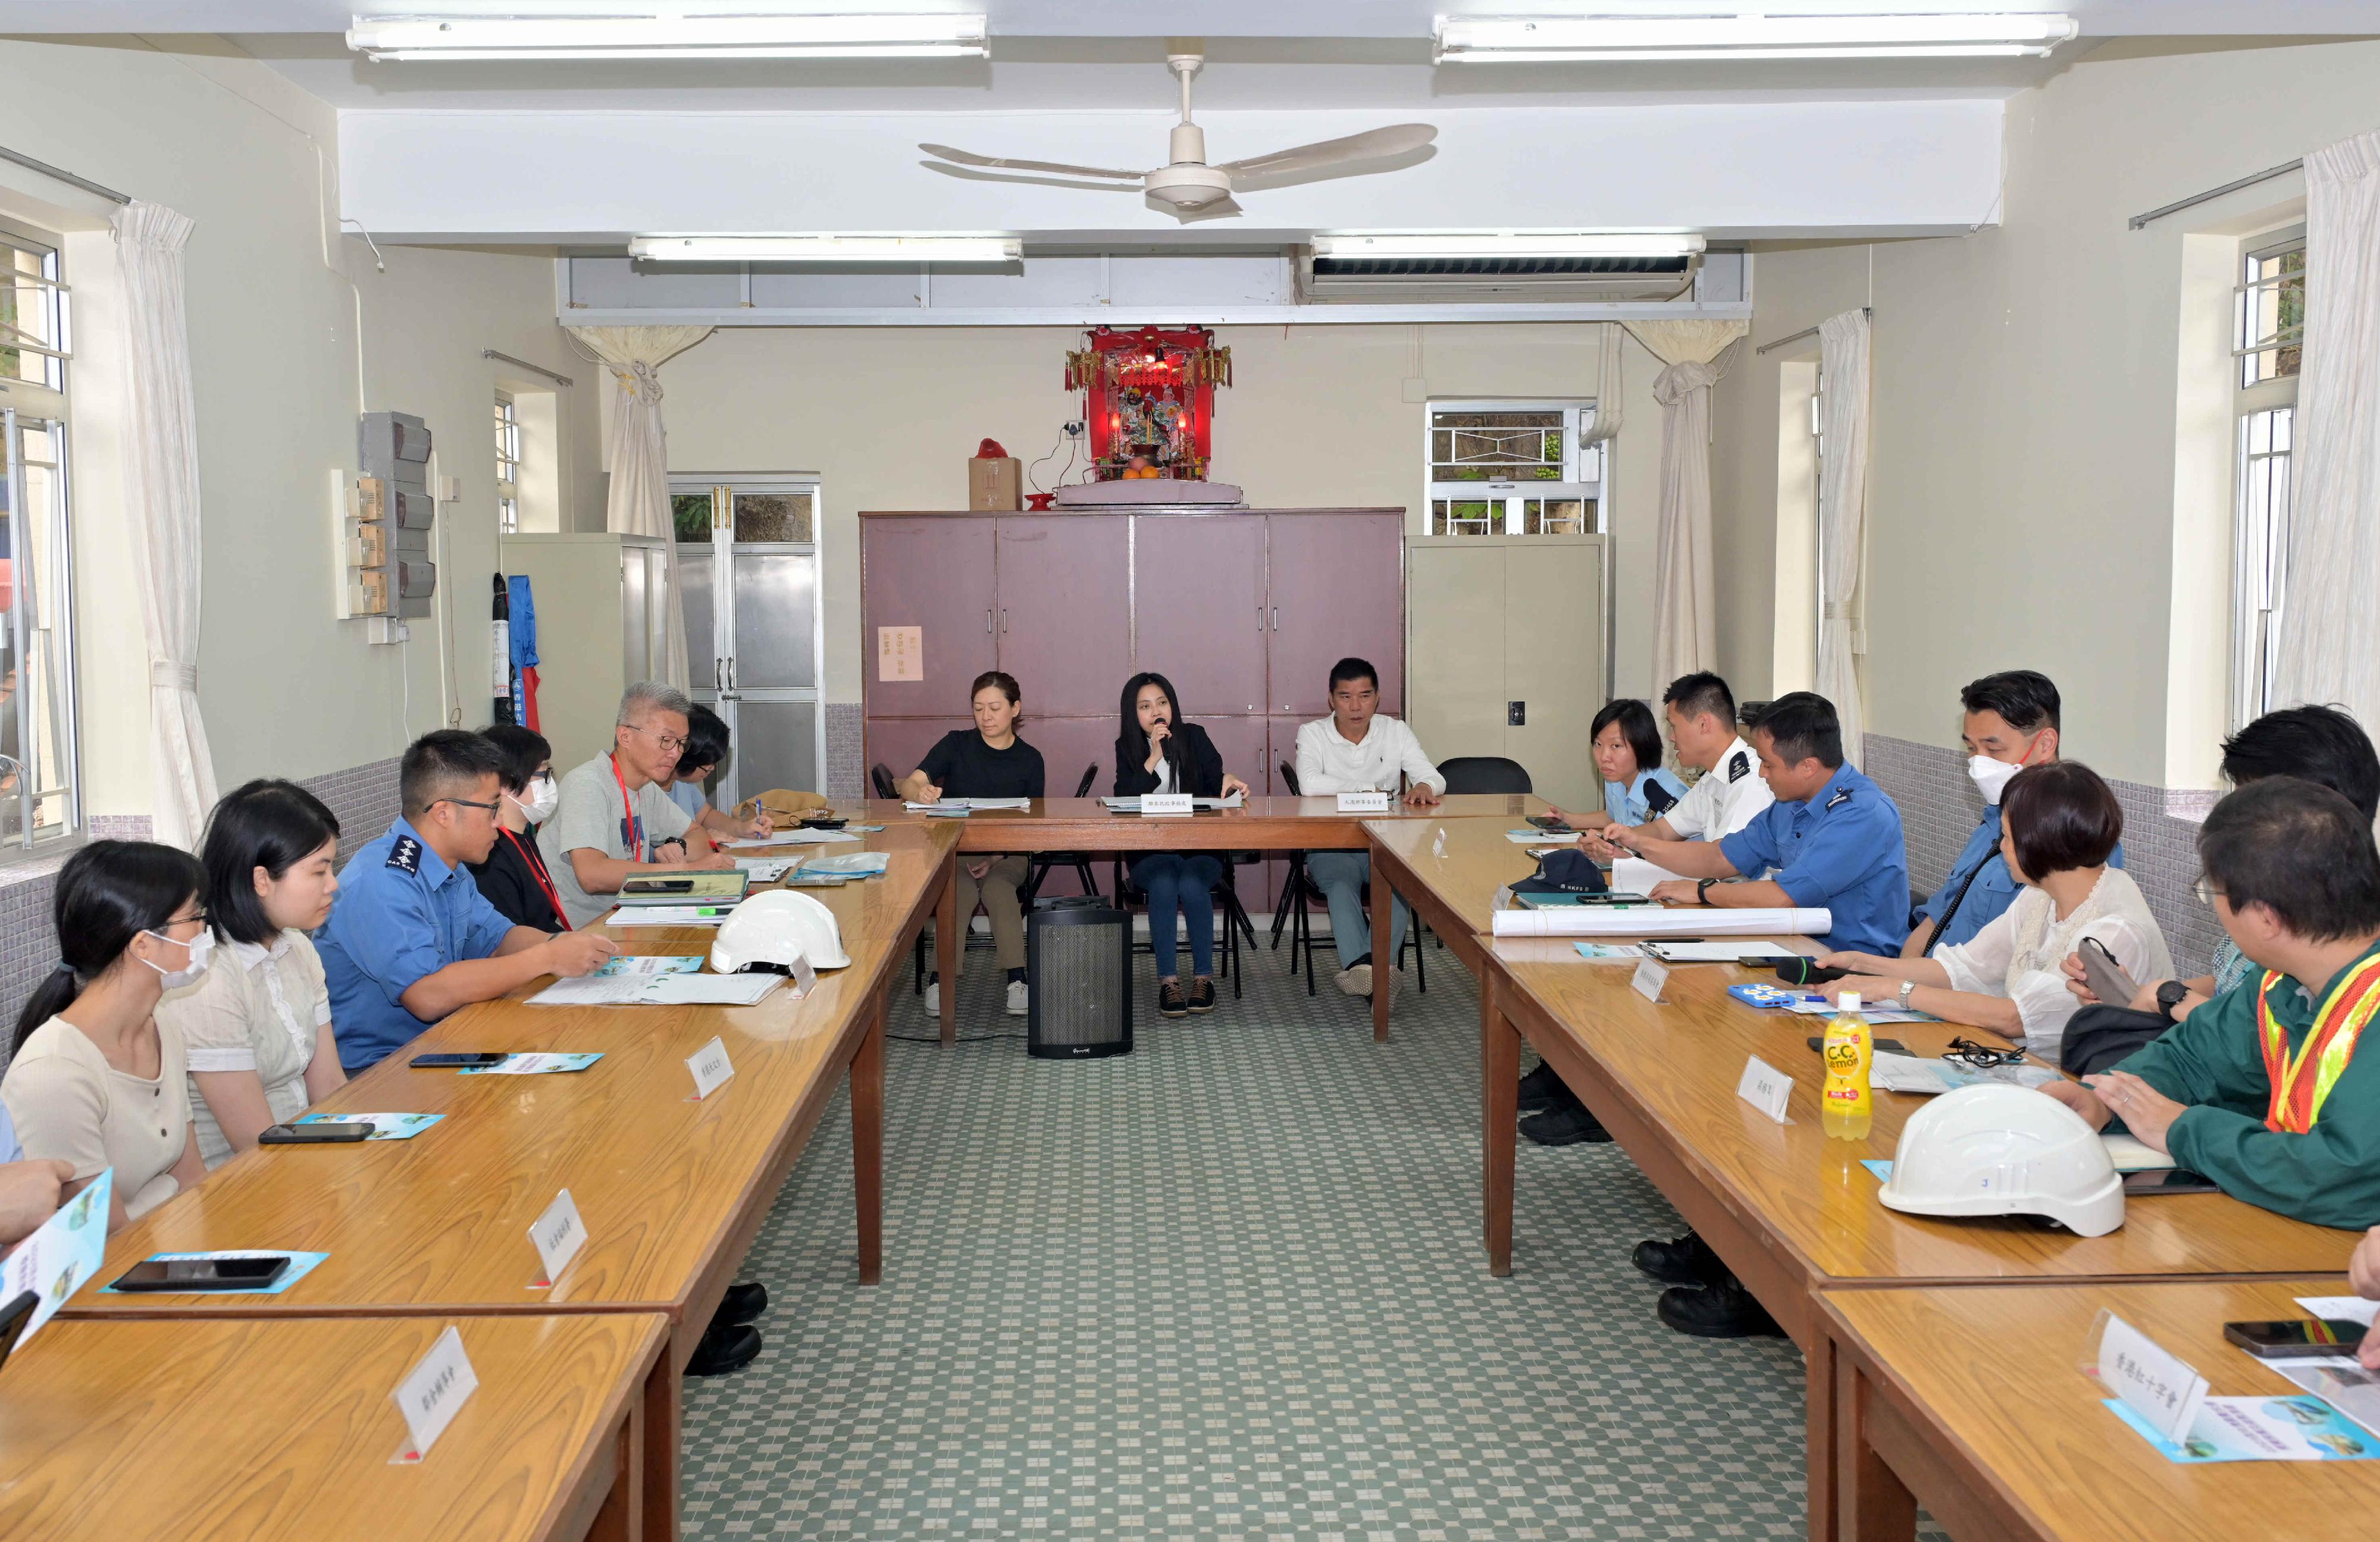 The Islands District Office conducted an inter-departmental rescue and evacuation drill in the event of flooding in Tai O today (May 10). Photo shows staff members of the Islands District Office and representatives from participating departments and organisations reviewing the emergency response actions and relevant arrangements after the drill.